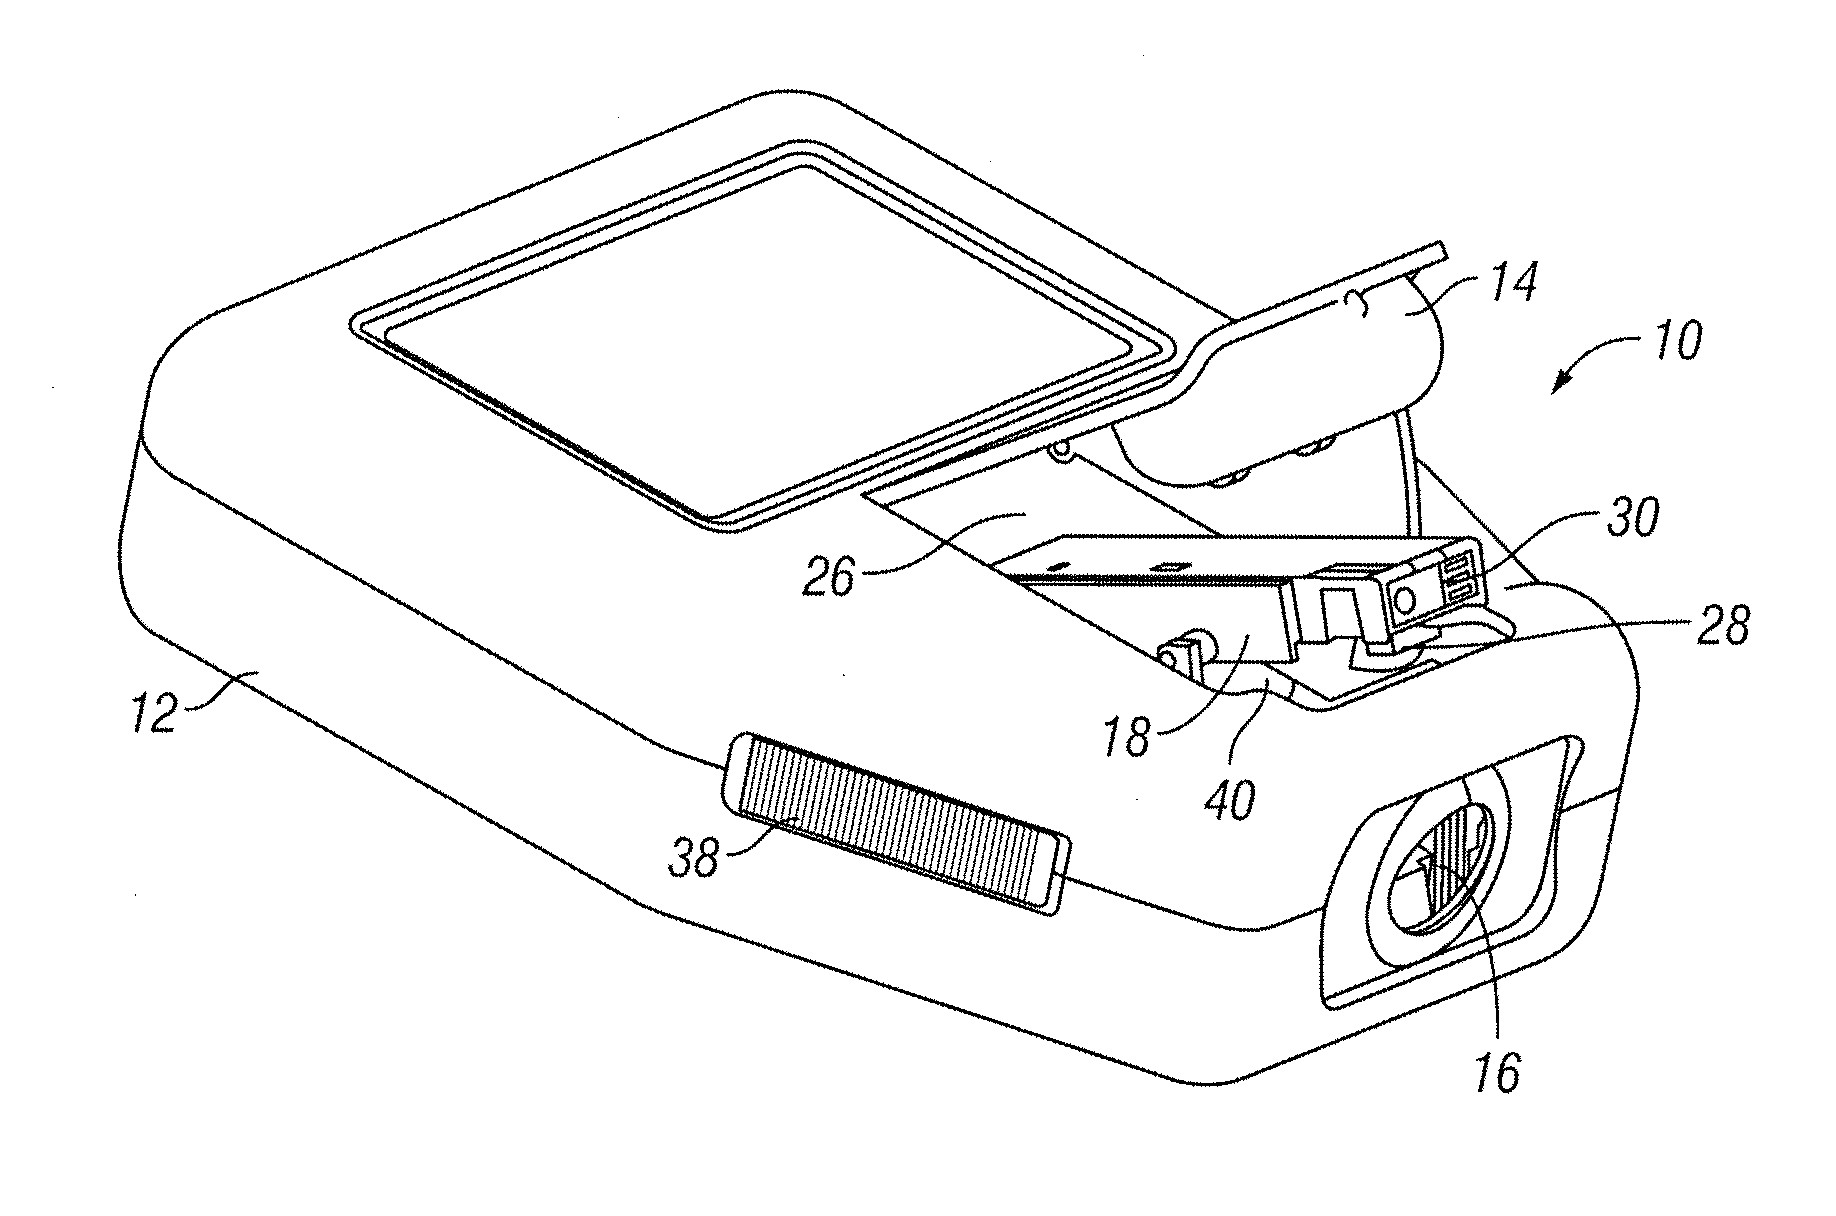 Analyte measurement device with a single shot actuator